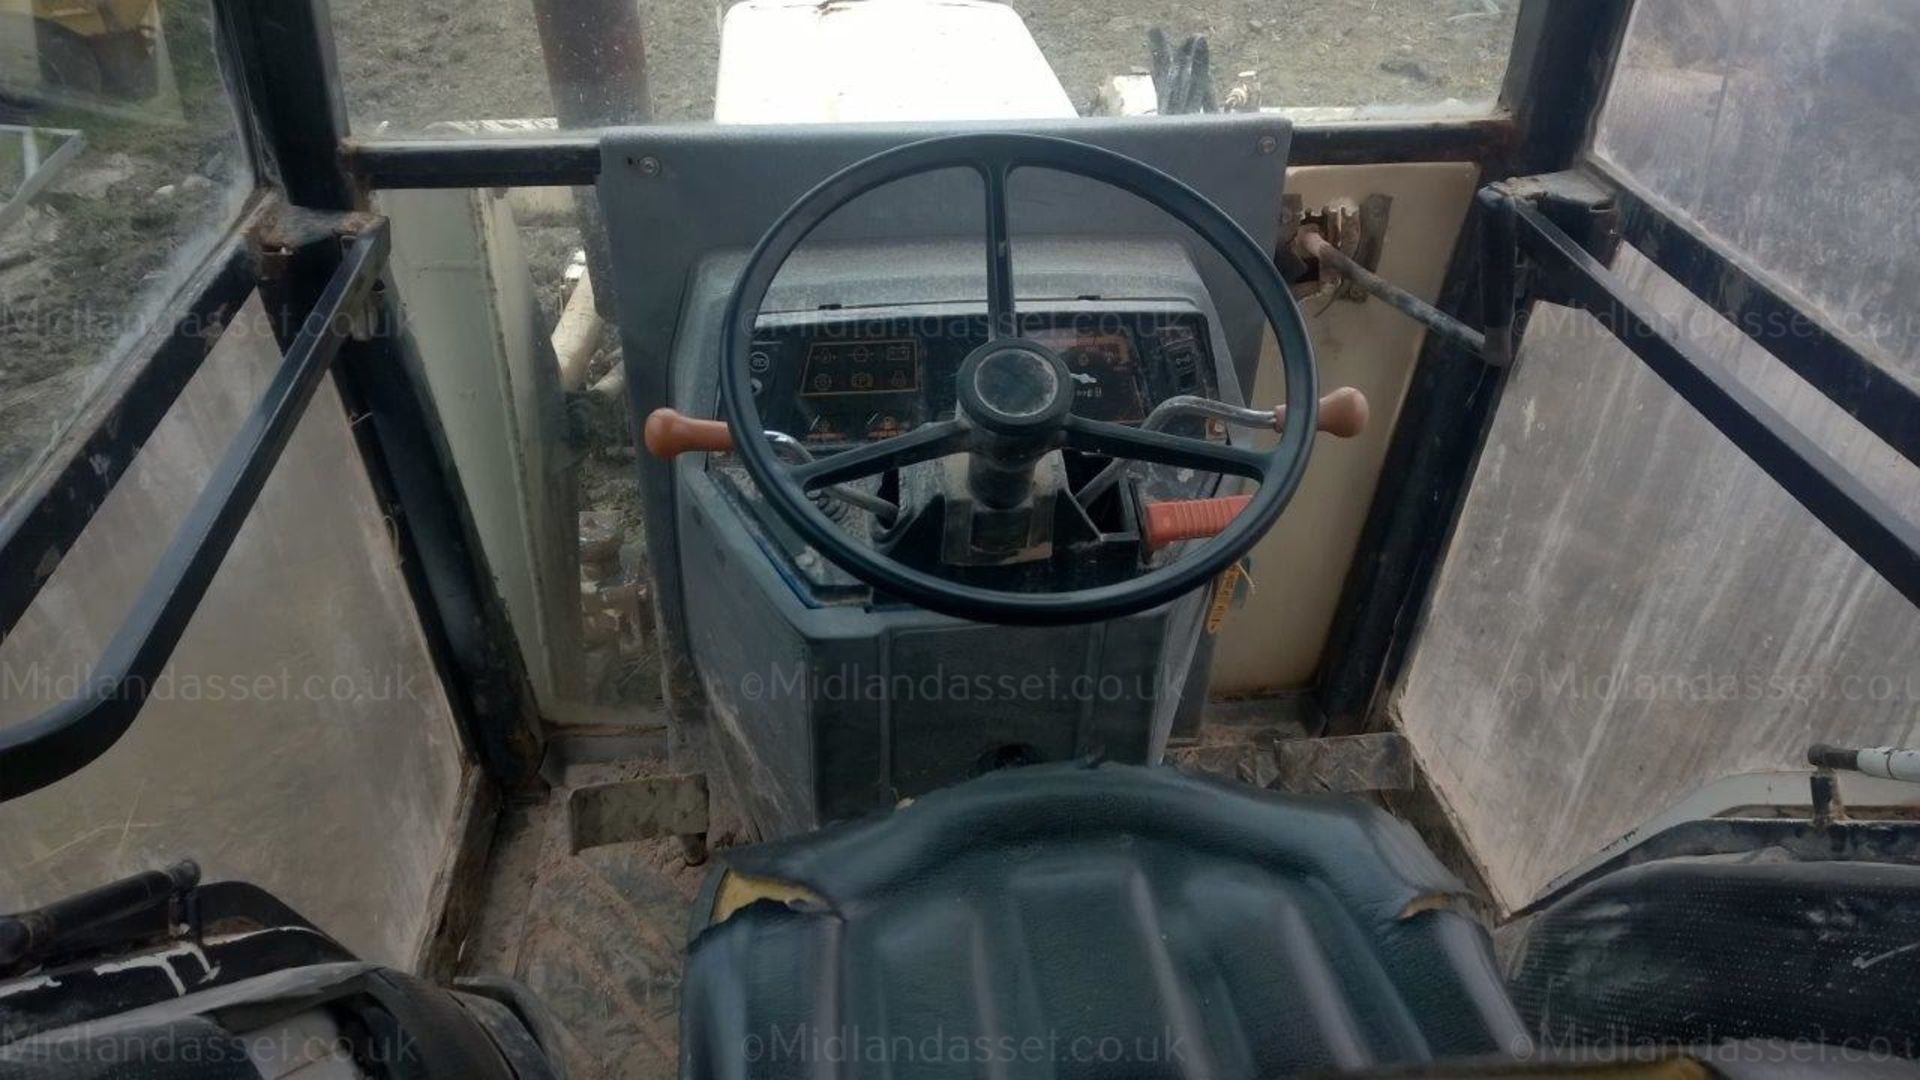 FORD 2120 COMPACT TRACTOR - Image 6 of 7